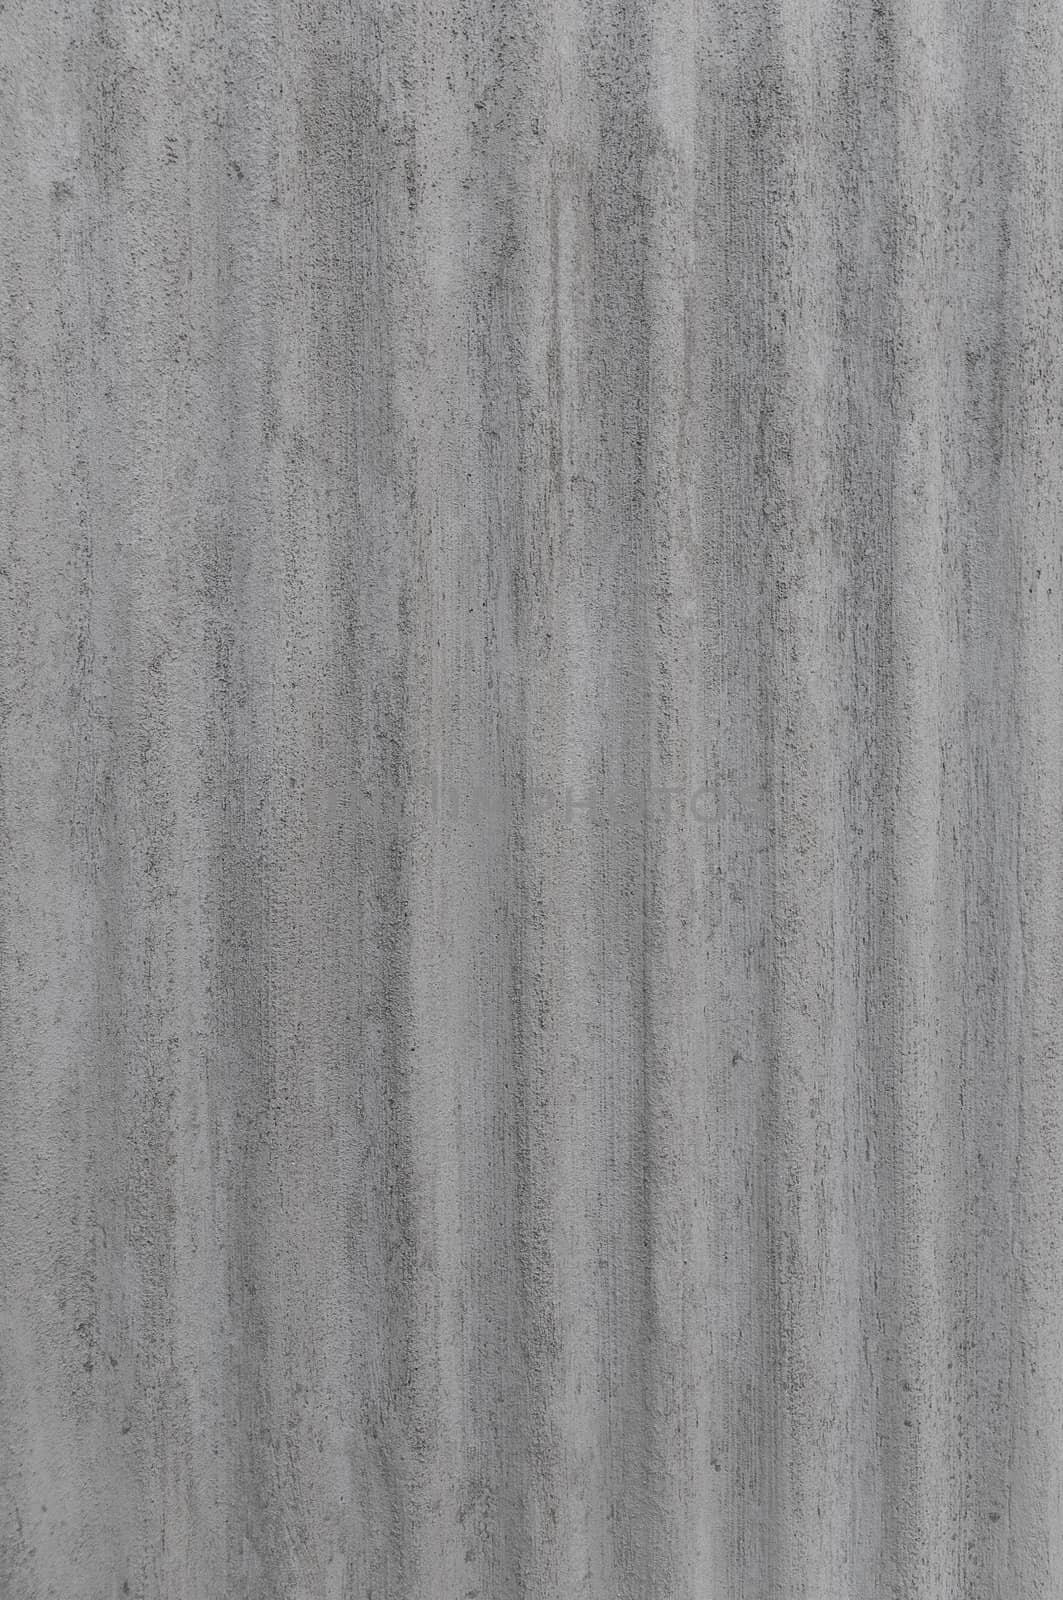 Rough gray corrugated steel backdrop.